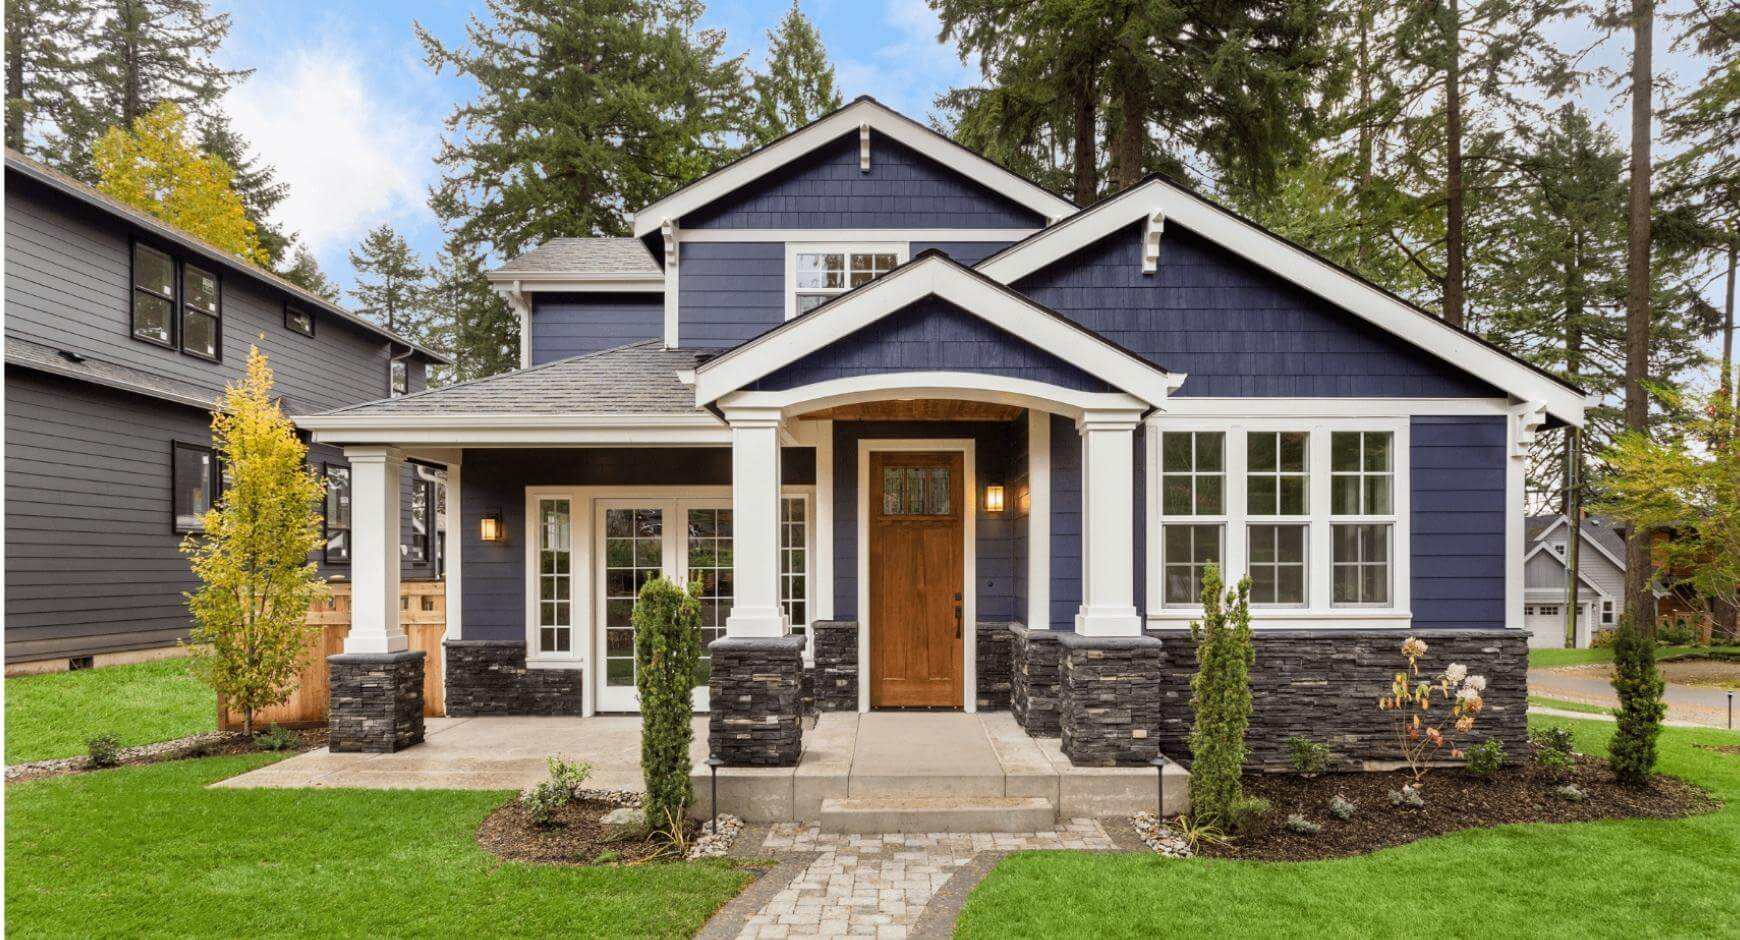 Navy blue house with white trim